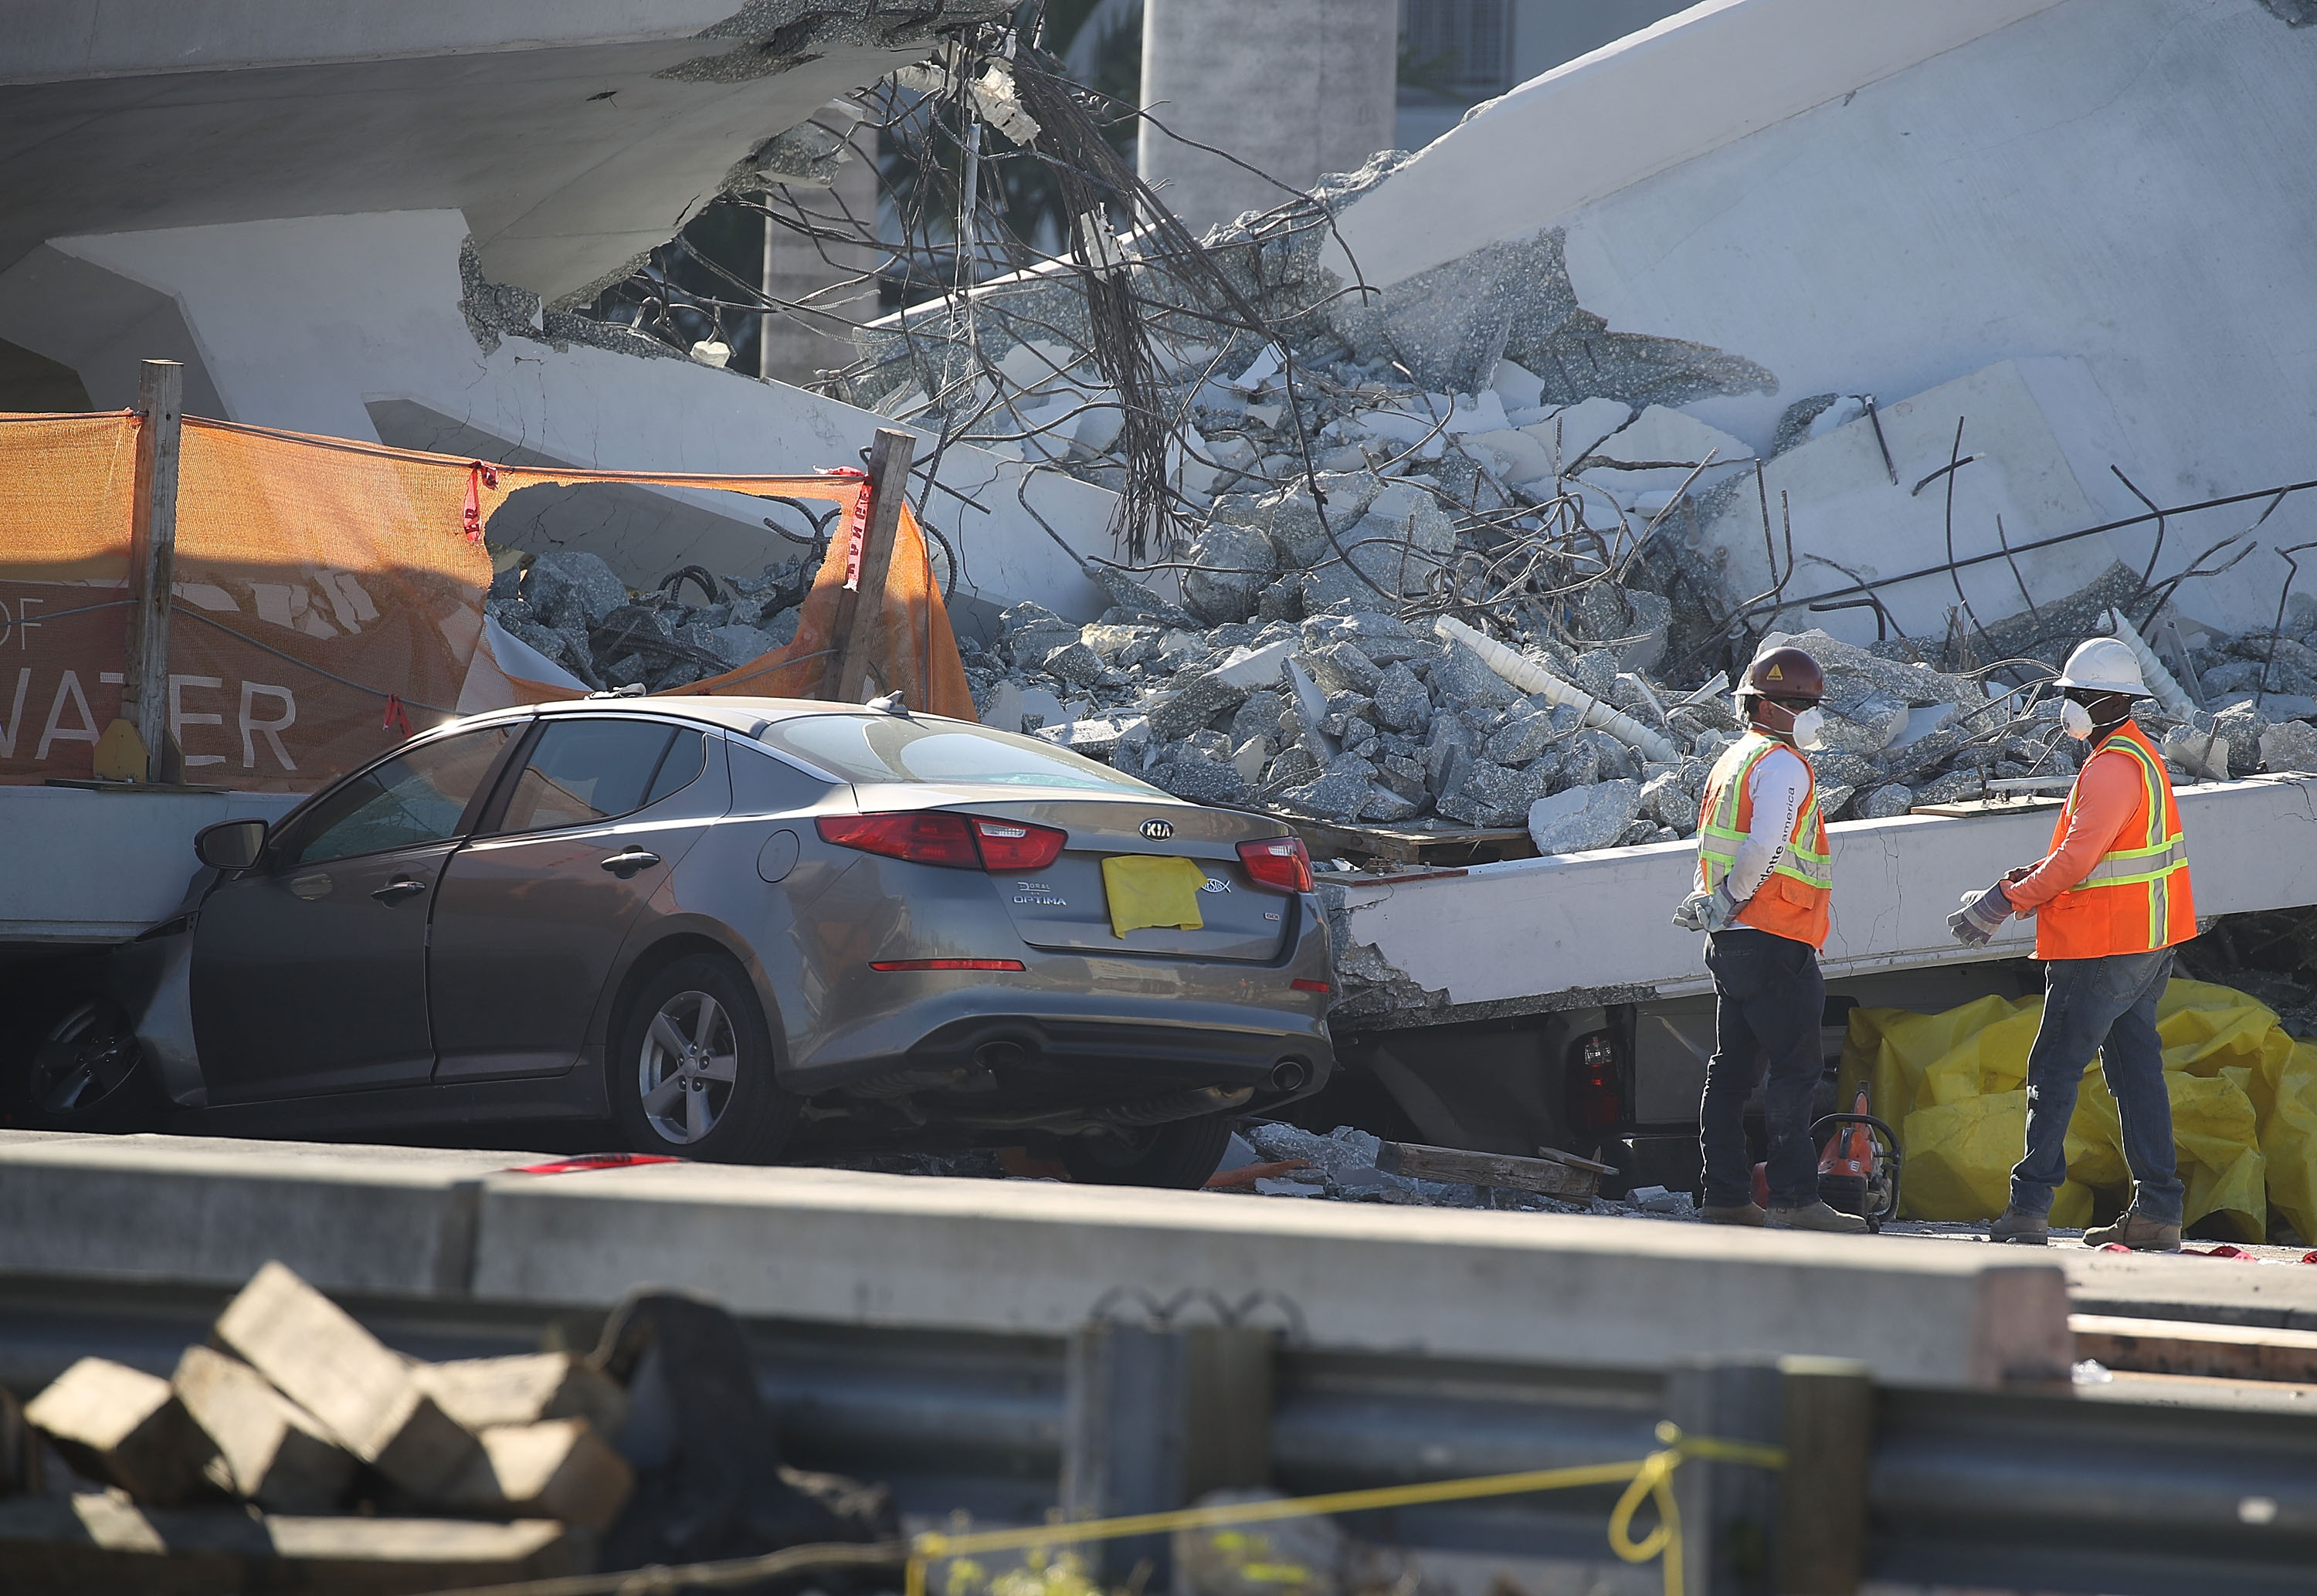 Workers, law enforcement and members of the National Transportation Safety Board investigate the scene where a pedestrian bridge collapsed a few days after it was built over southwest 8th street allowing people to bypass the busy street to reach Florida International University on March 16, 2018 in Miami, Florida. (Joe Raedle—Getty Images)